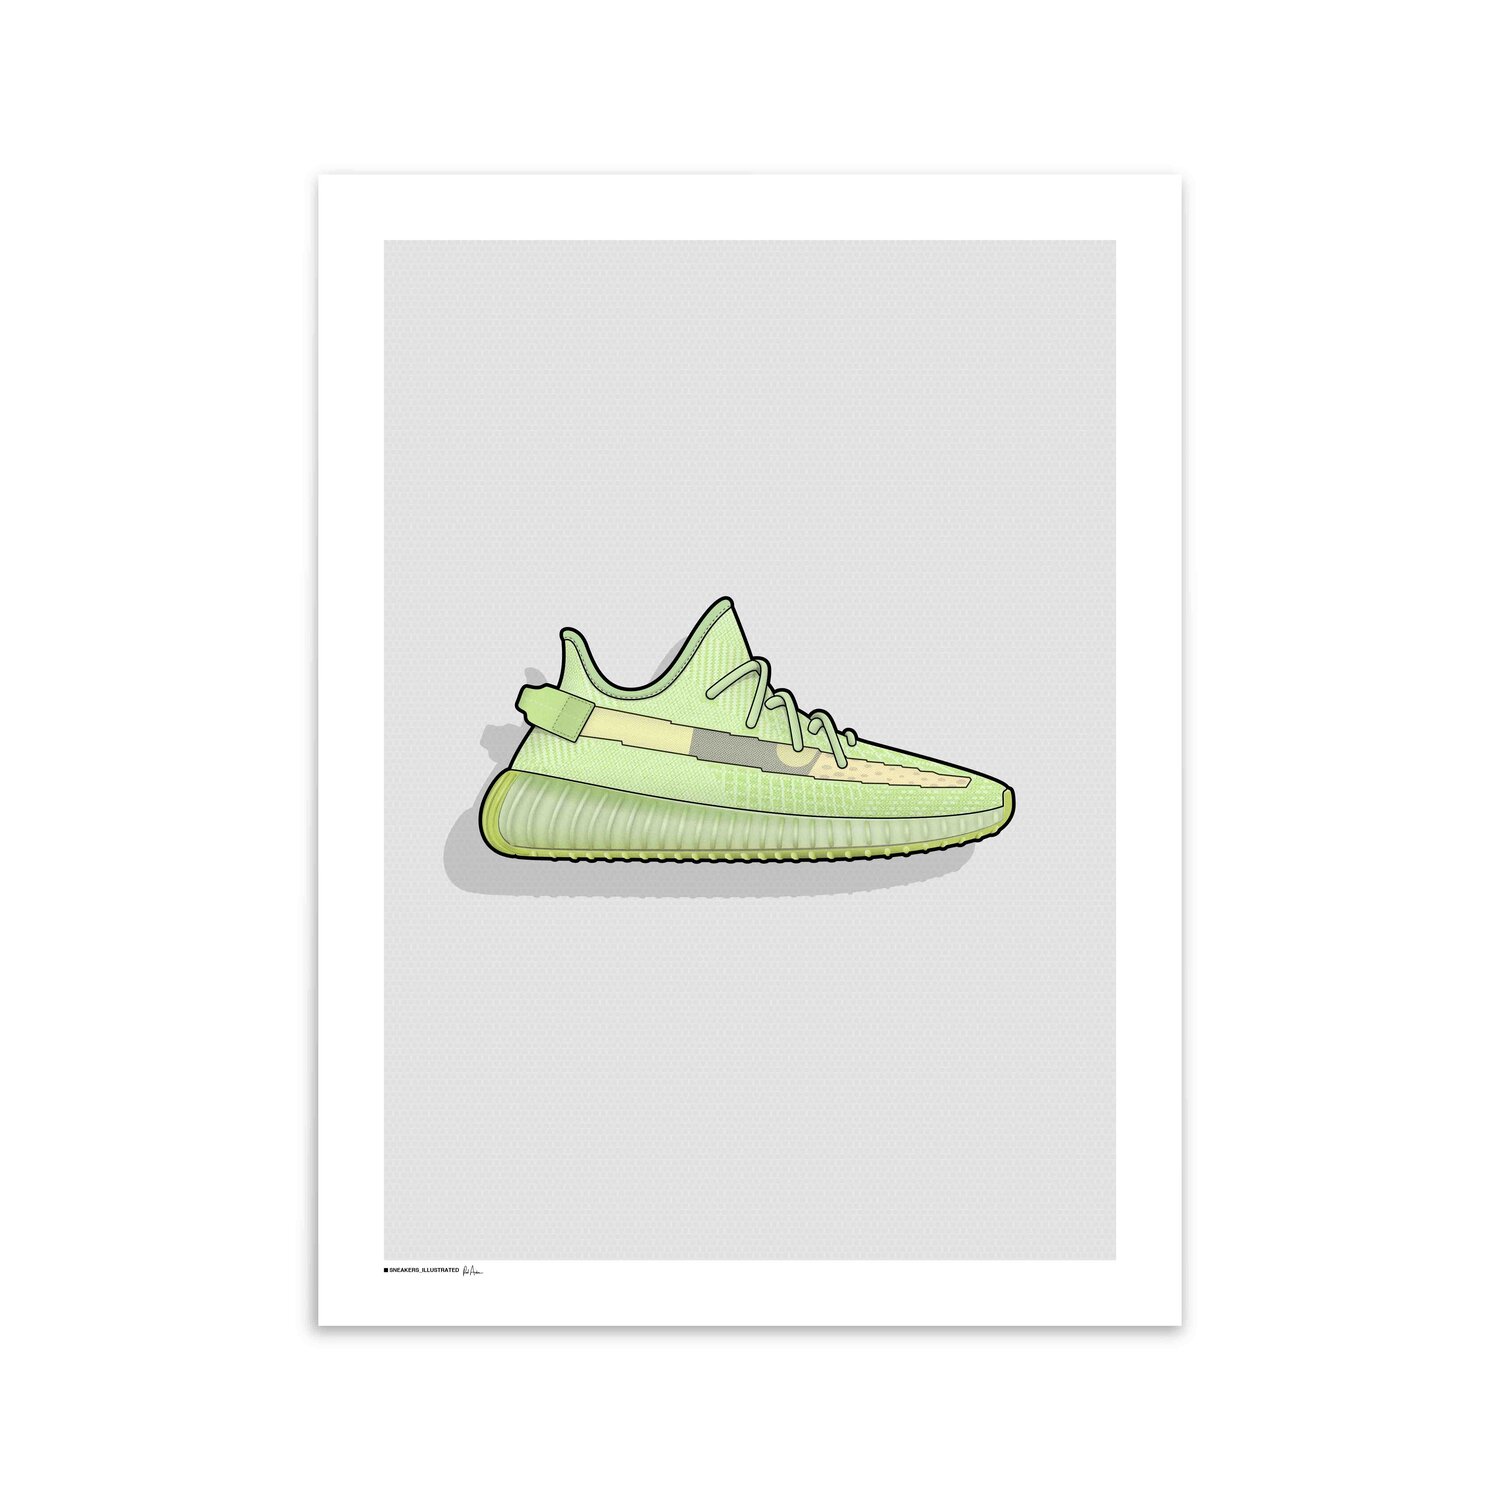 Yeezy Boost 350 V2 'Glow' Poster — Sneakers Illustrated